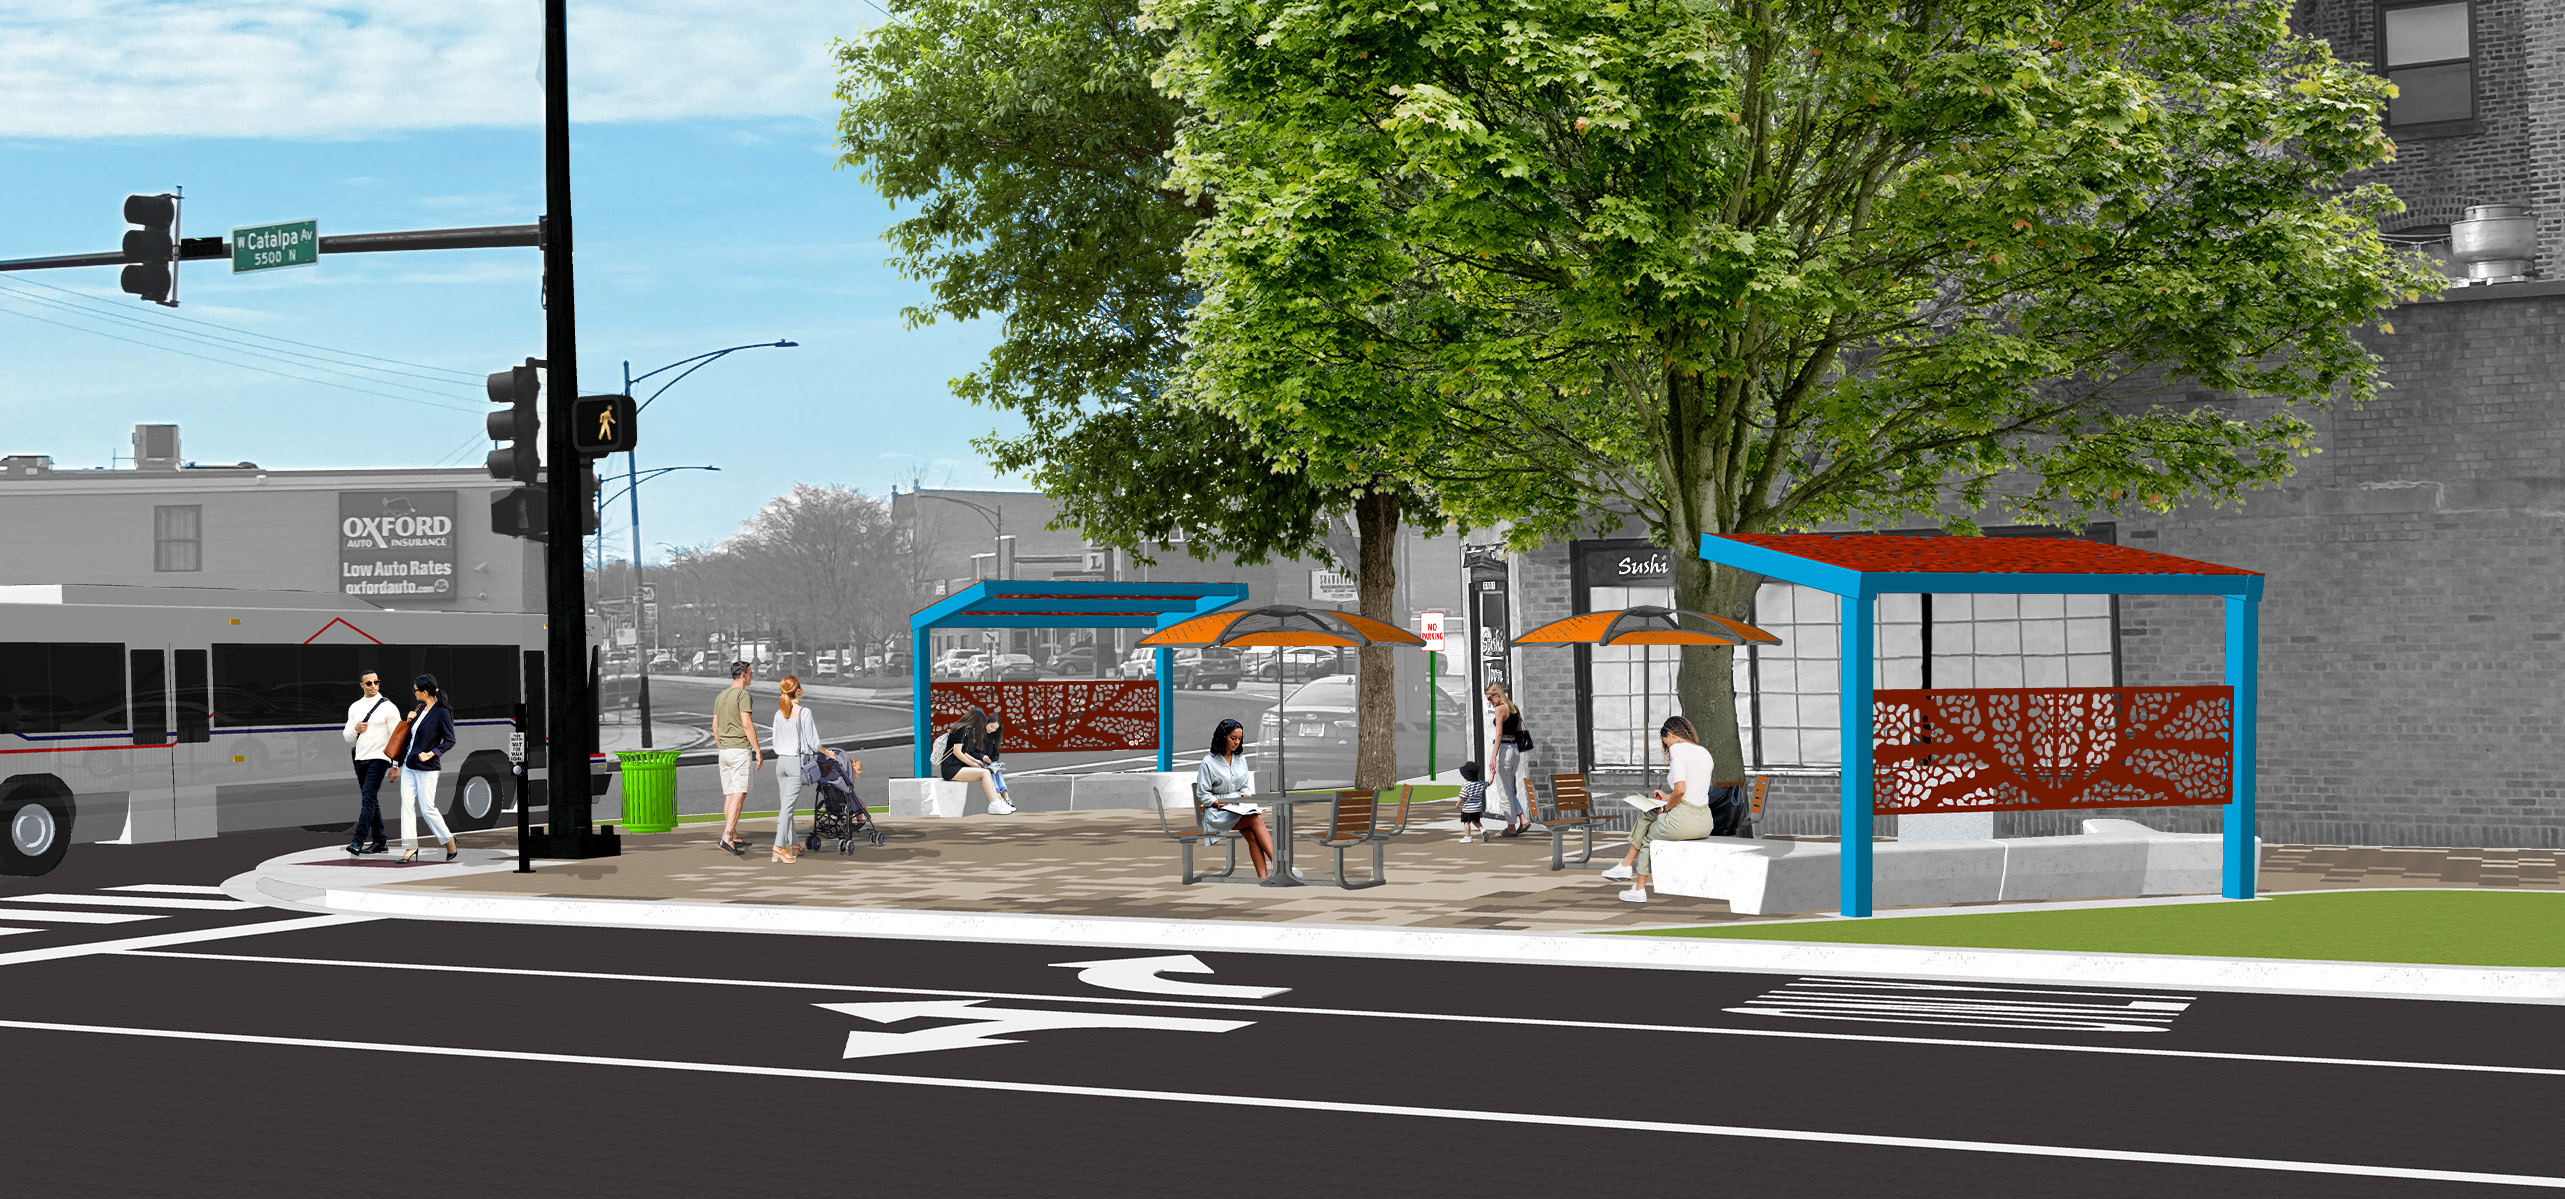 Rendering of a community gathering space at Catalpa Ave with people gathered on benches 